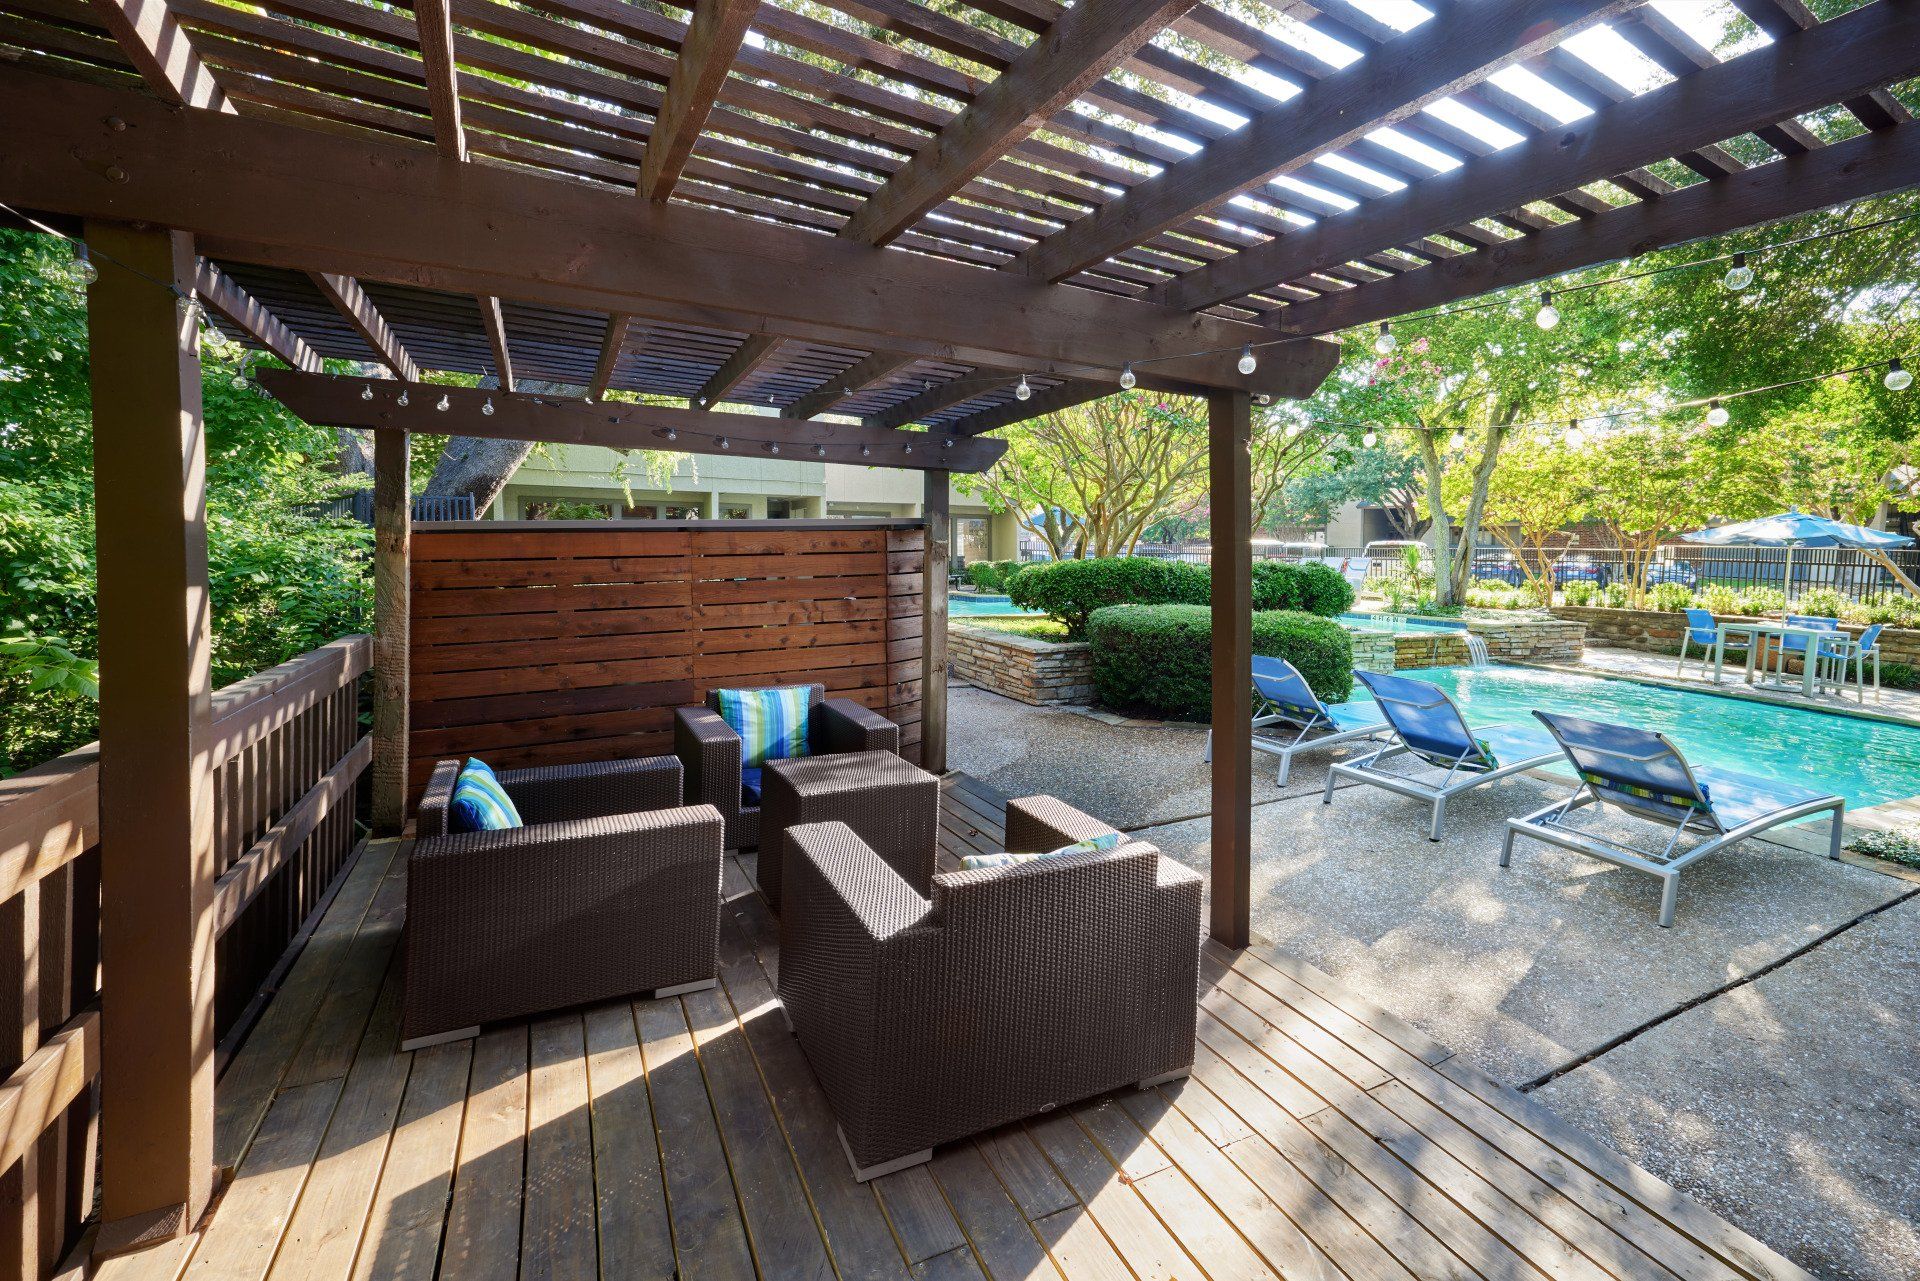 A wooden deck with chairs and a pergola overlooking a swimming pool at Summerwood Cove Apartments.